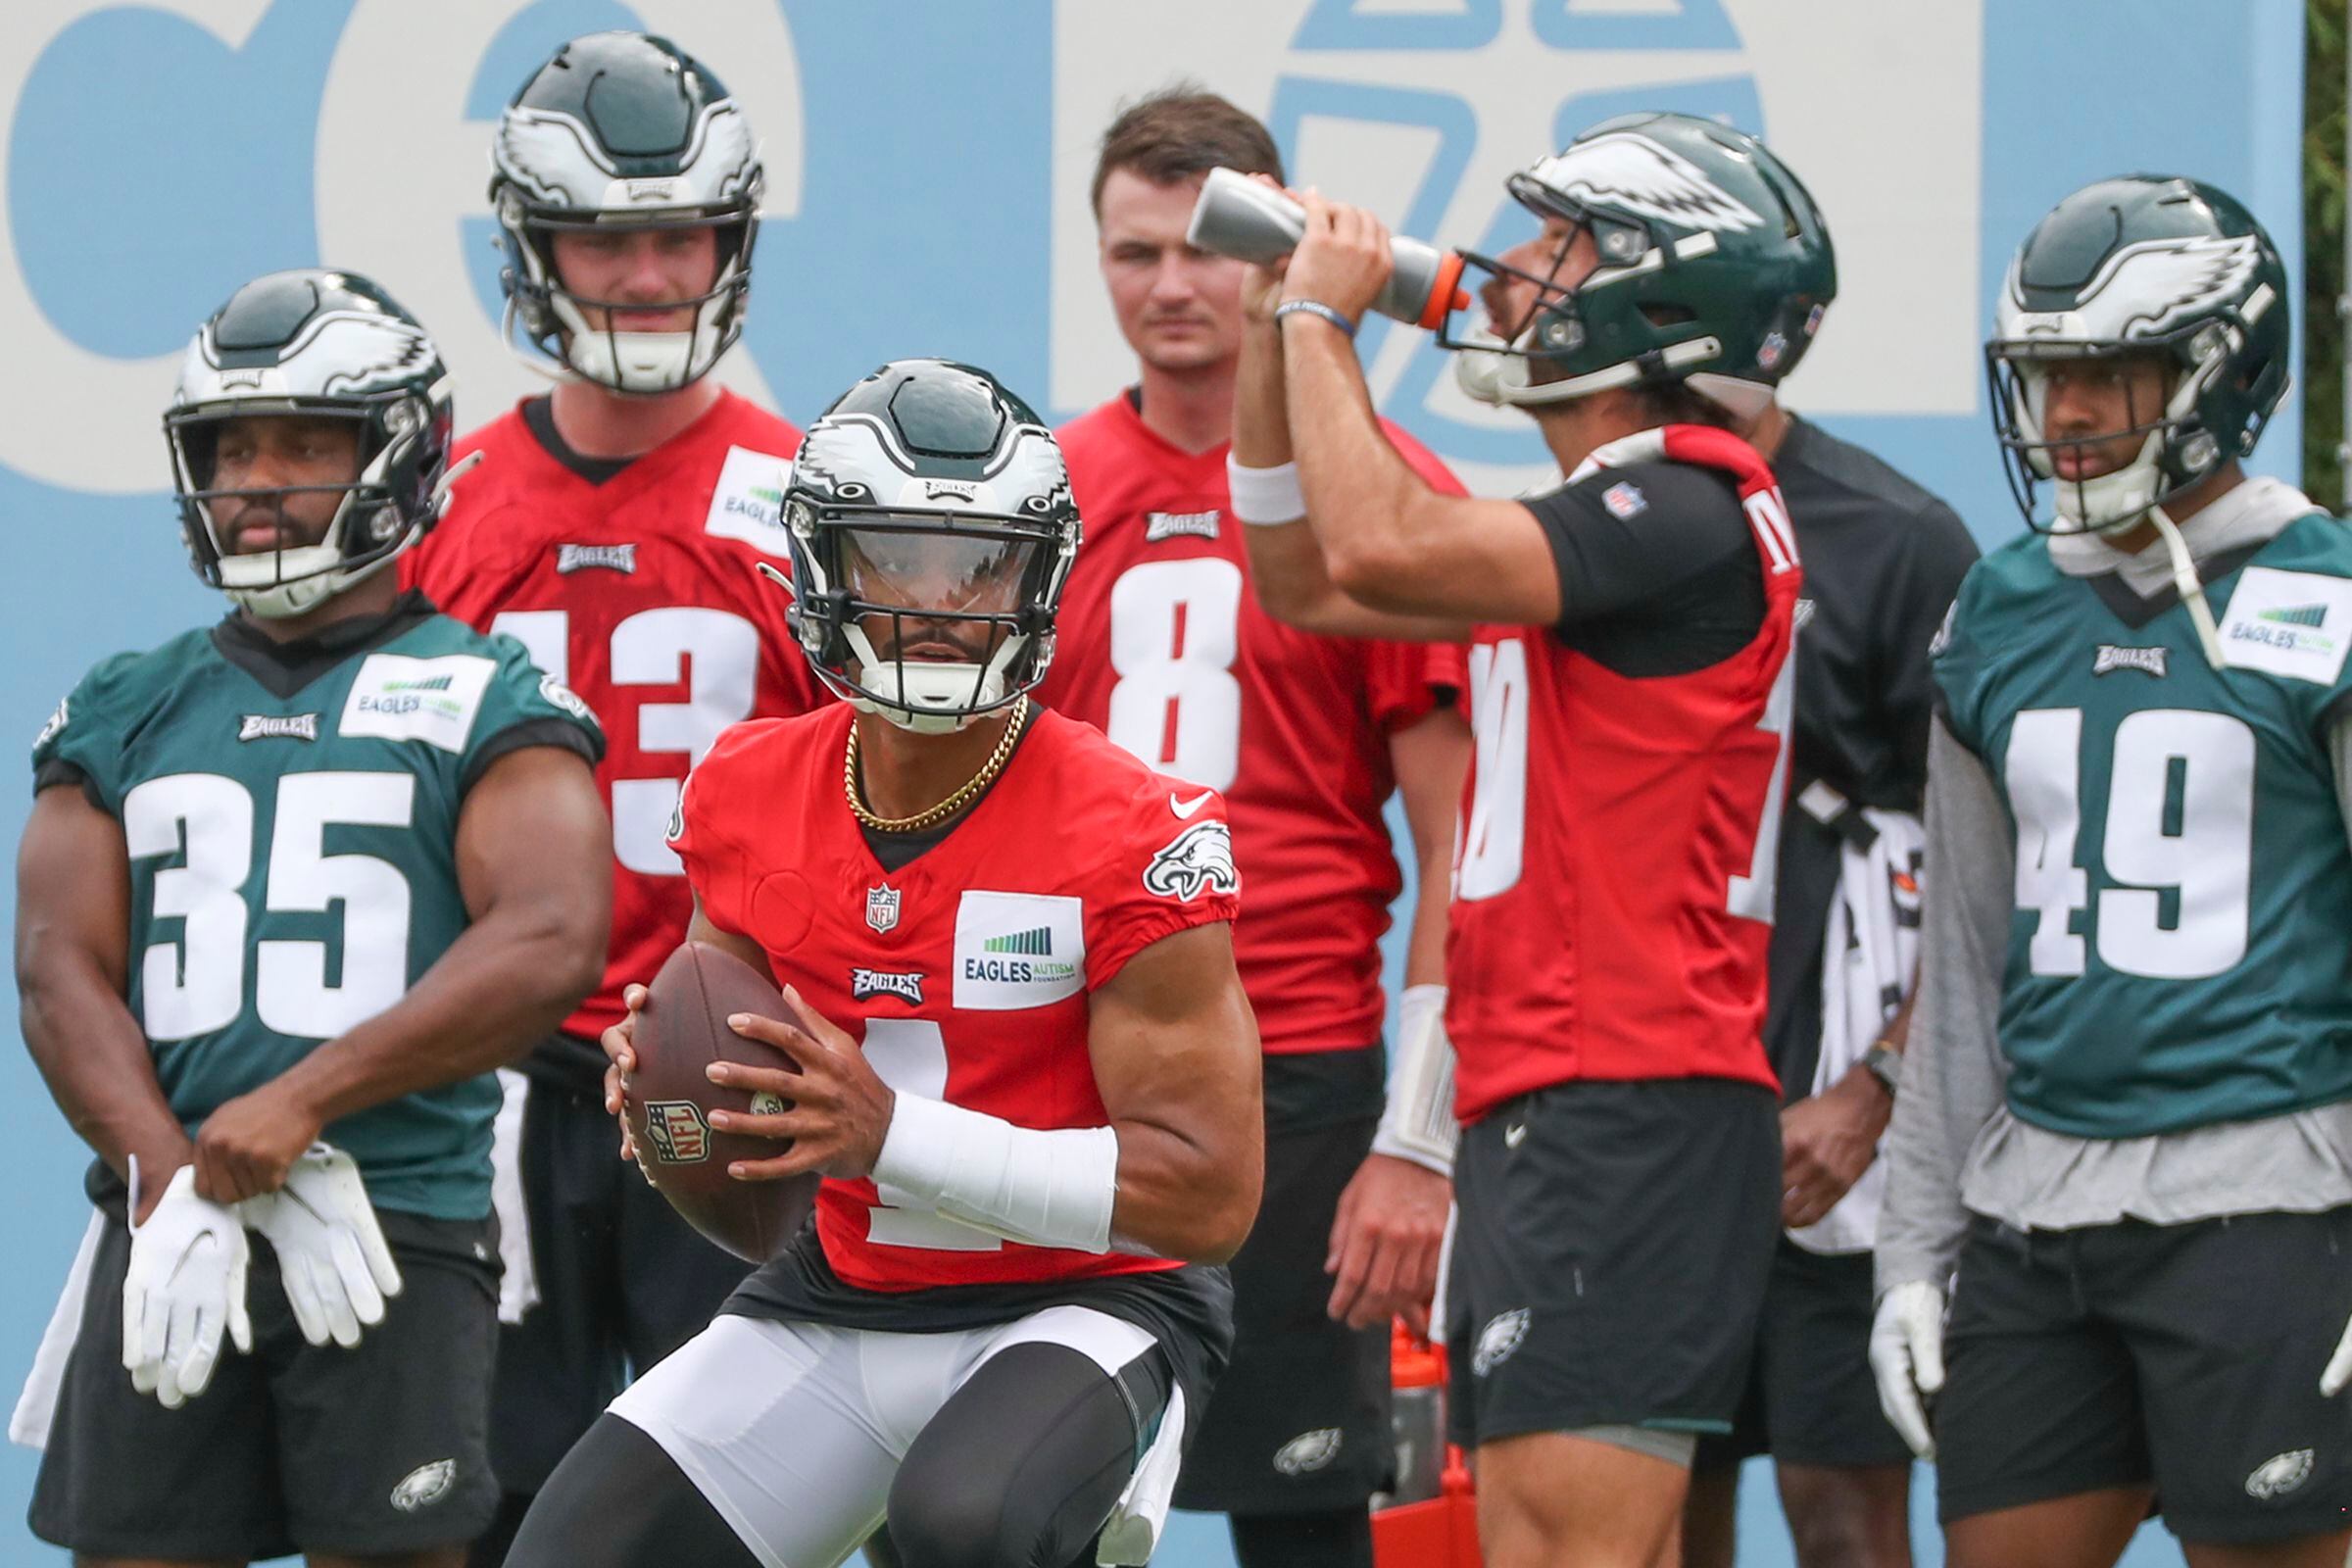 The Philadelphia Eagles are in training camp, balancing rest and work